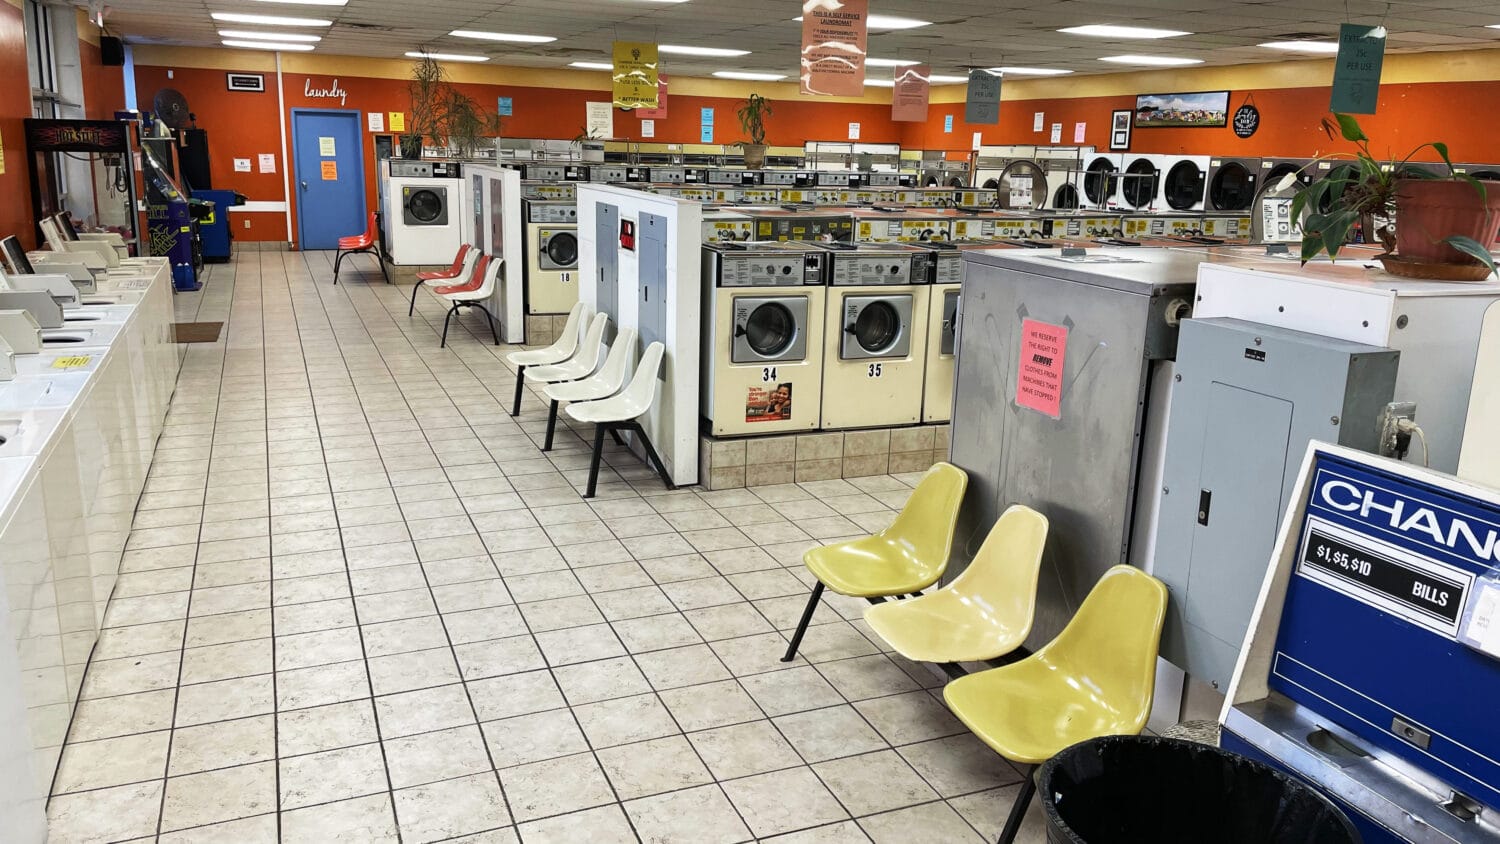 Downtown Laundromat Full Inside View